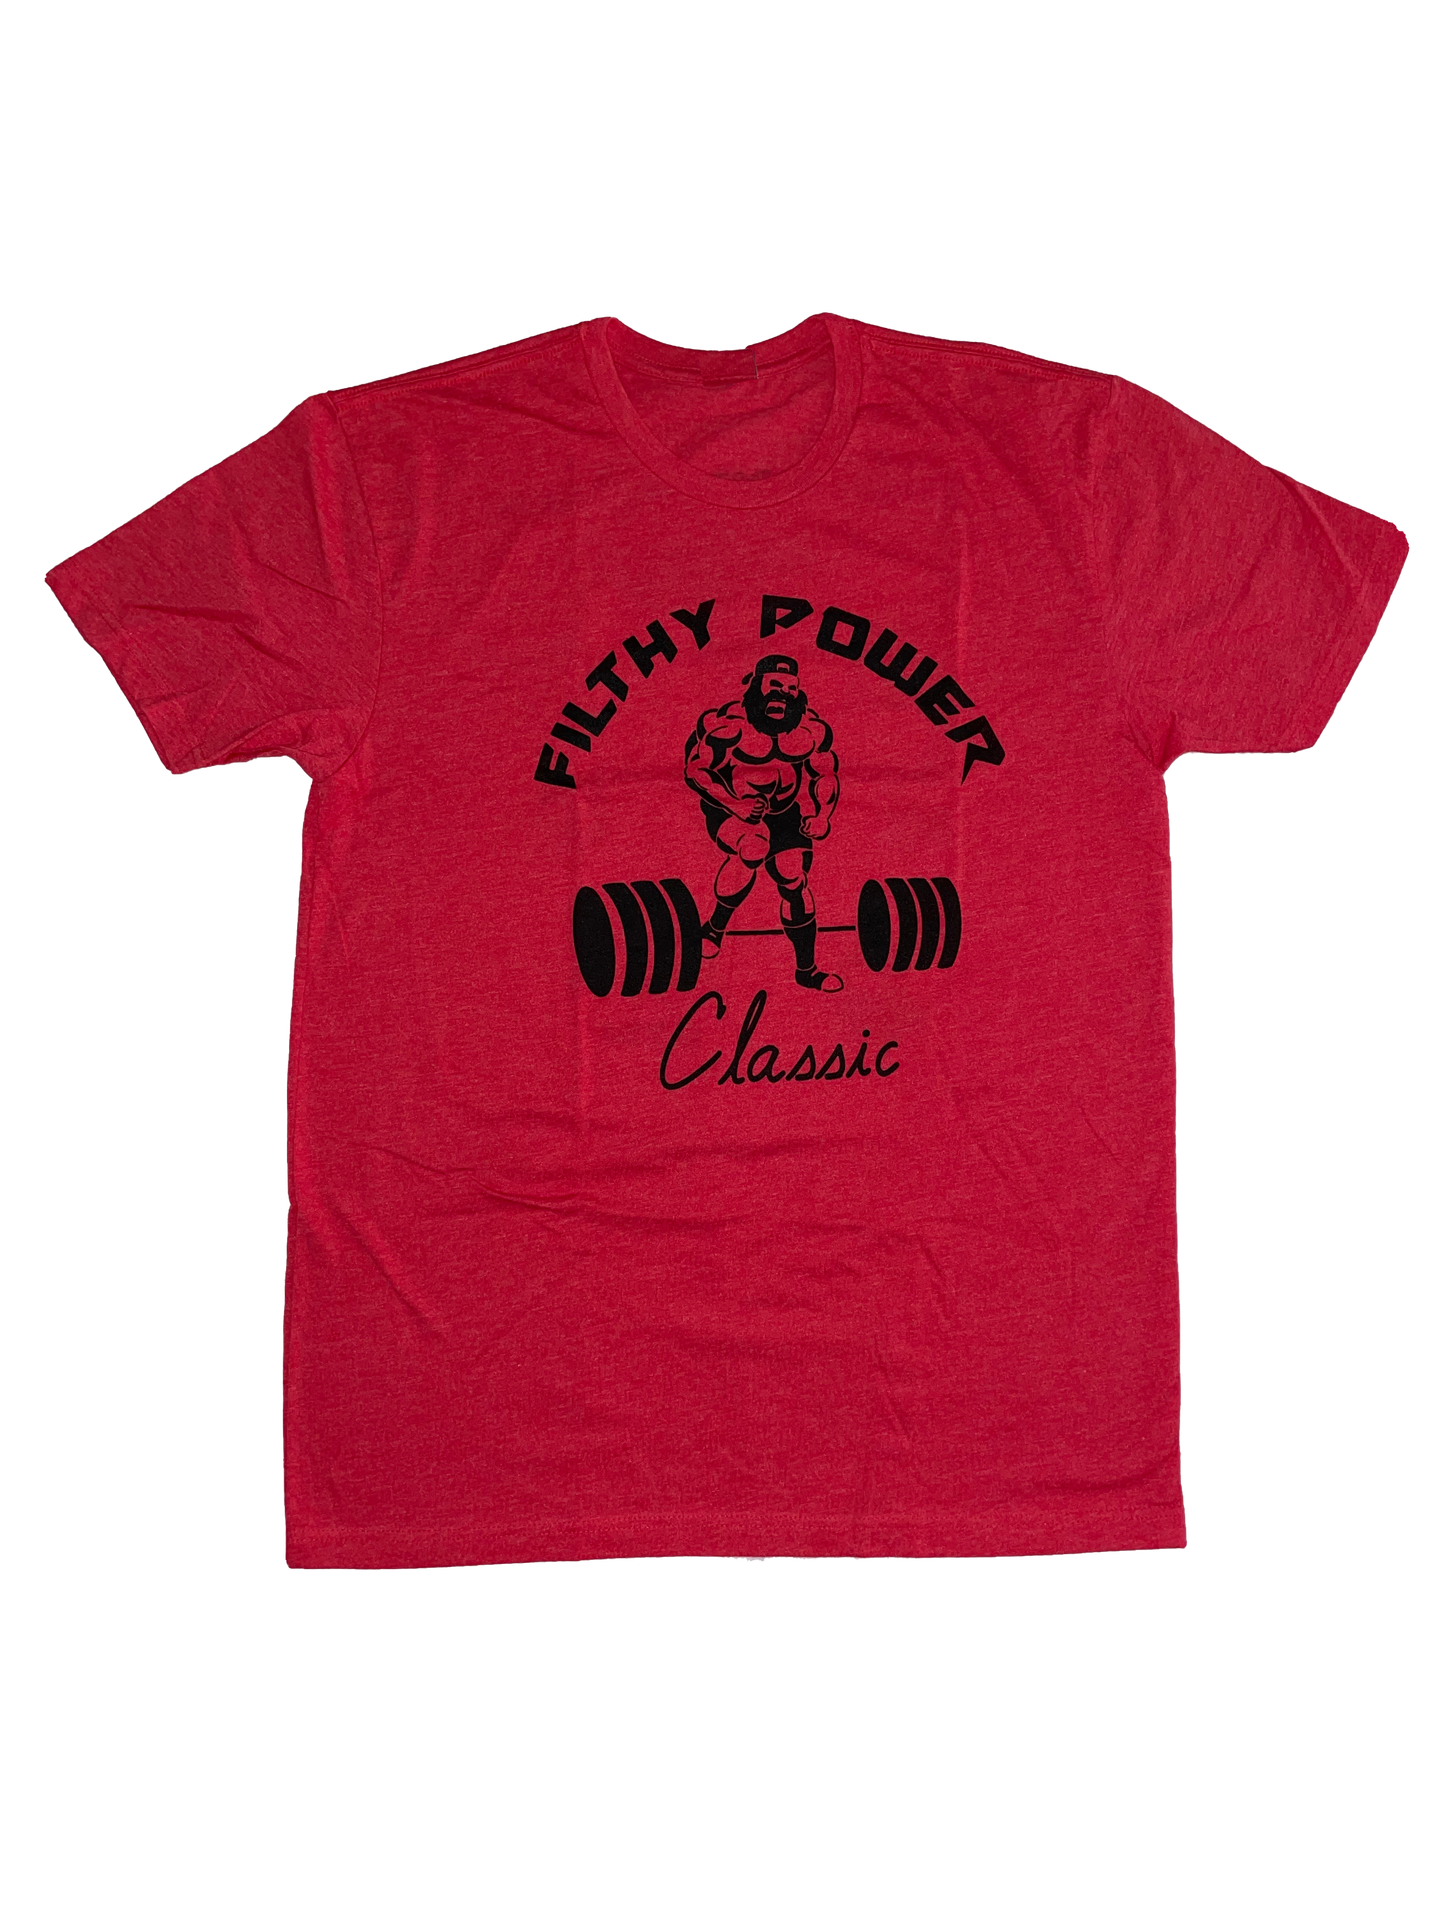 Filthy Power Classic - Red T-Shirt